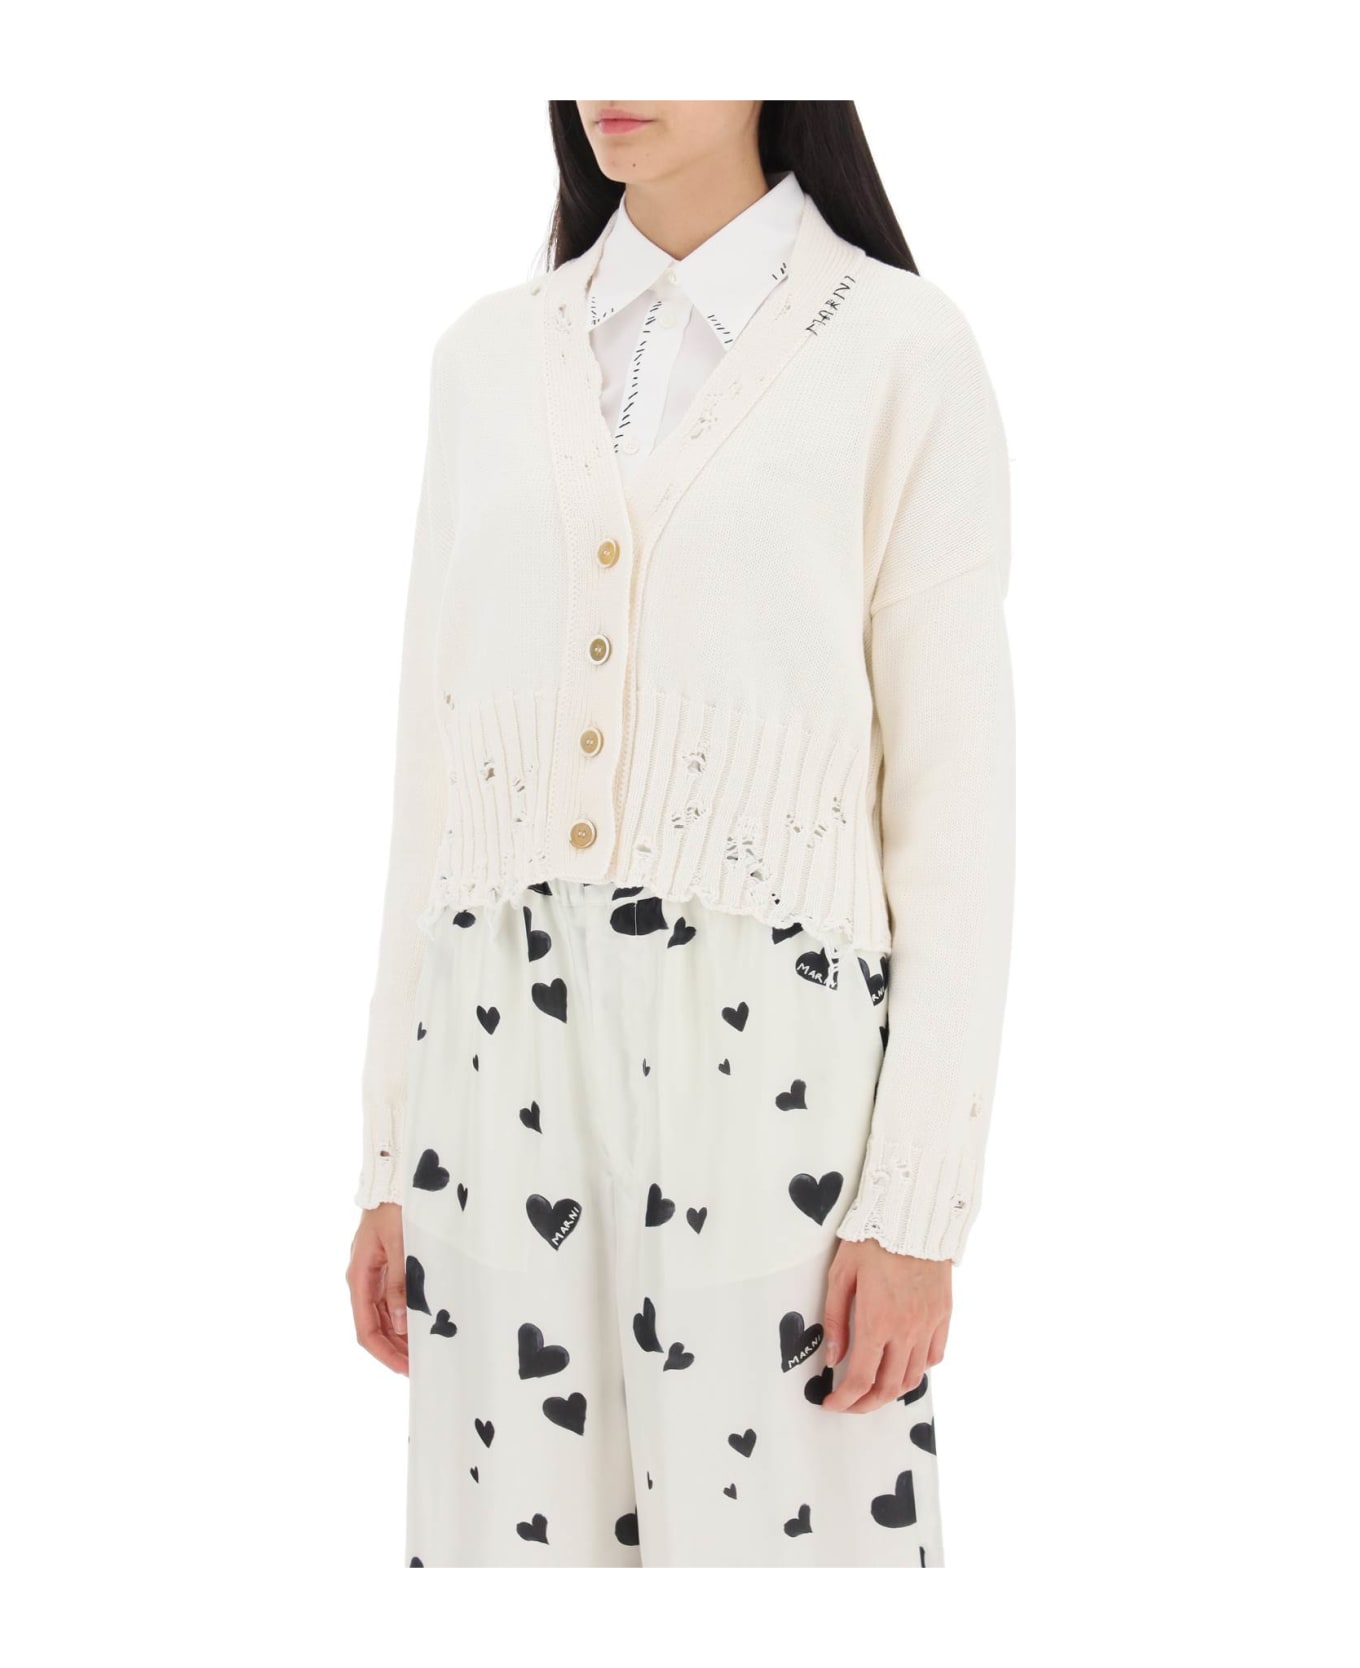 Marni Short Cardigan With White Cotton Wears - LILY WHITE (White) カーディガン